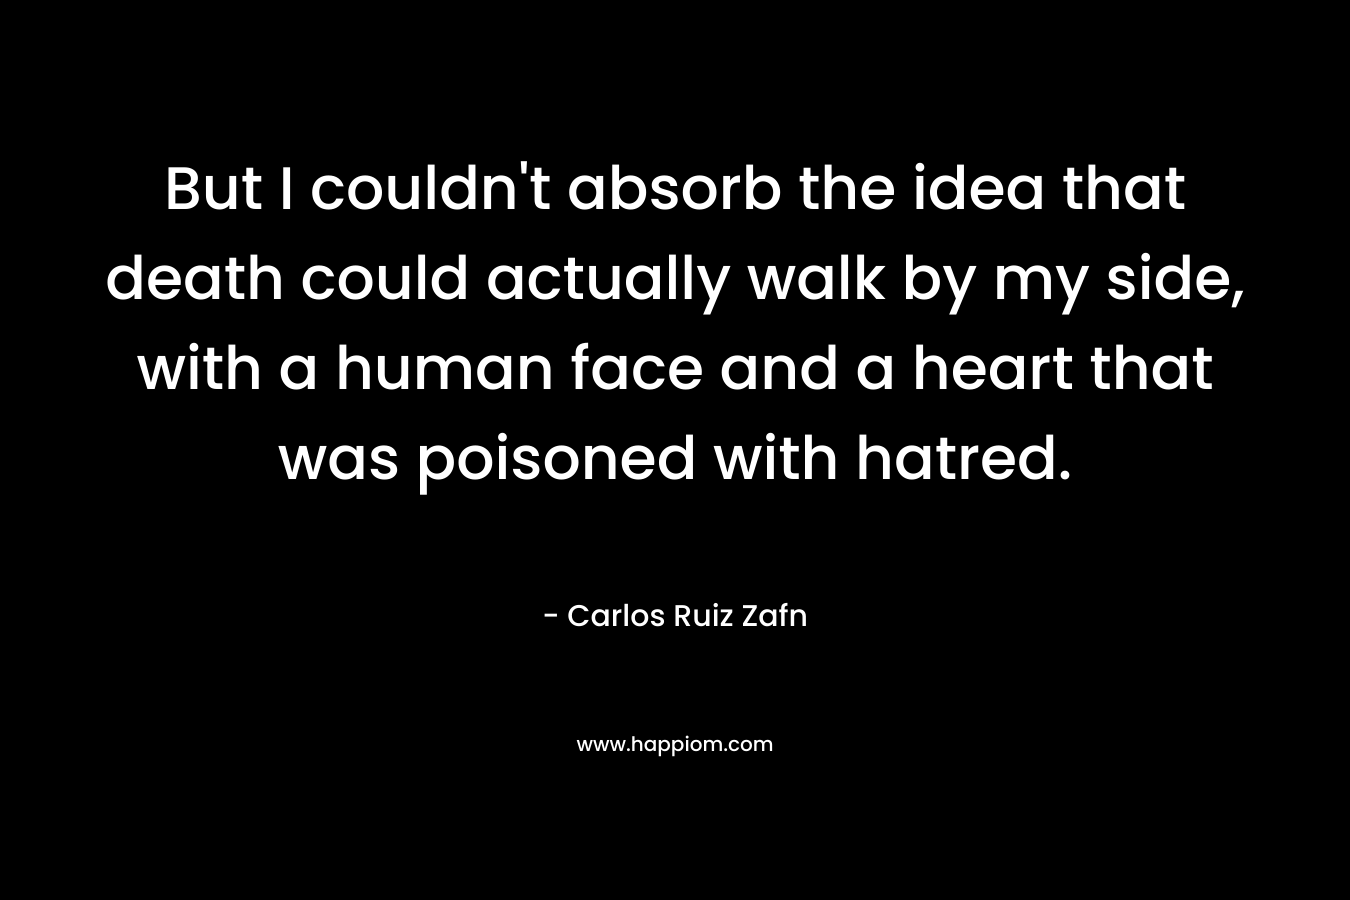 But I couldn’t absorb the idea that death could actually walk by my side, with a human face and a heart that was poisoned with hatred. – Carlos Ruiz Zafn